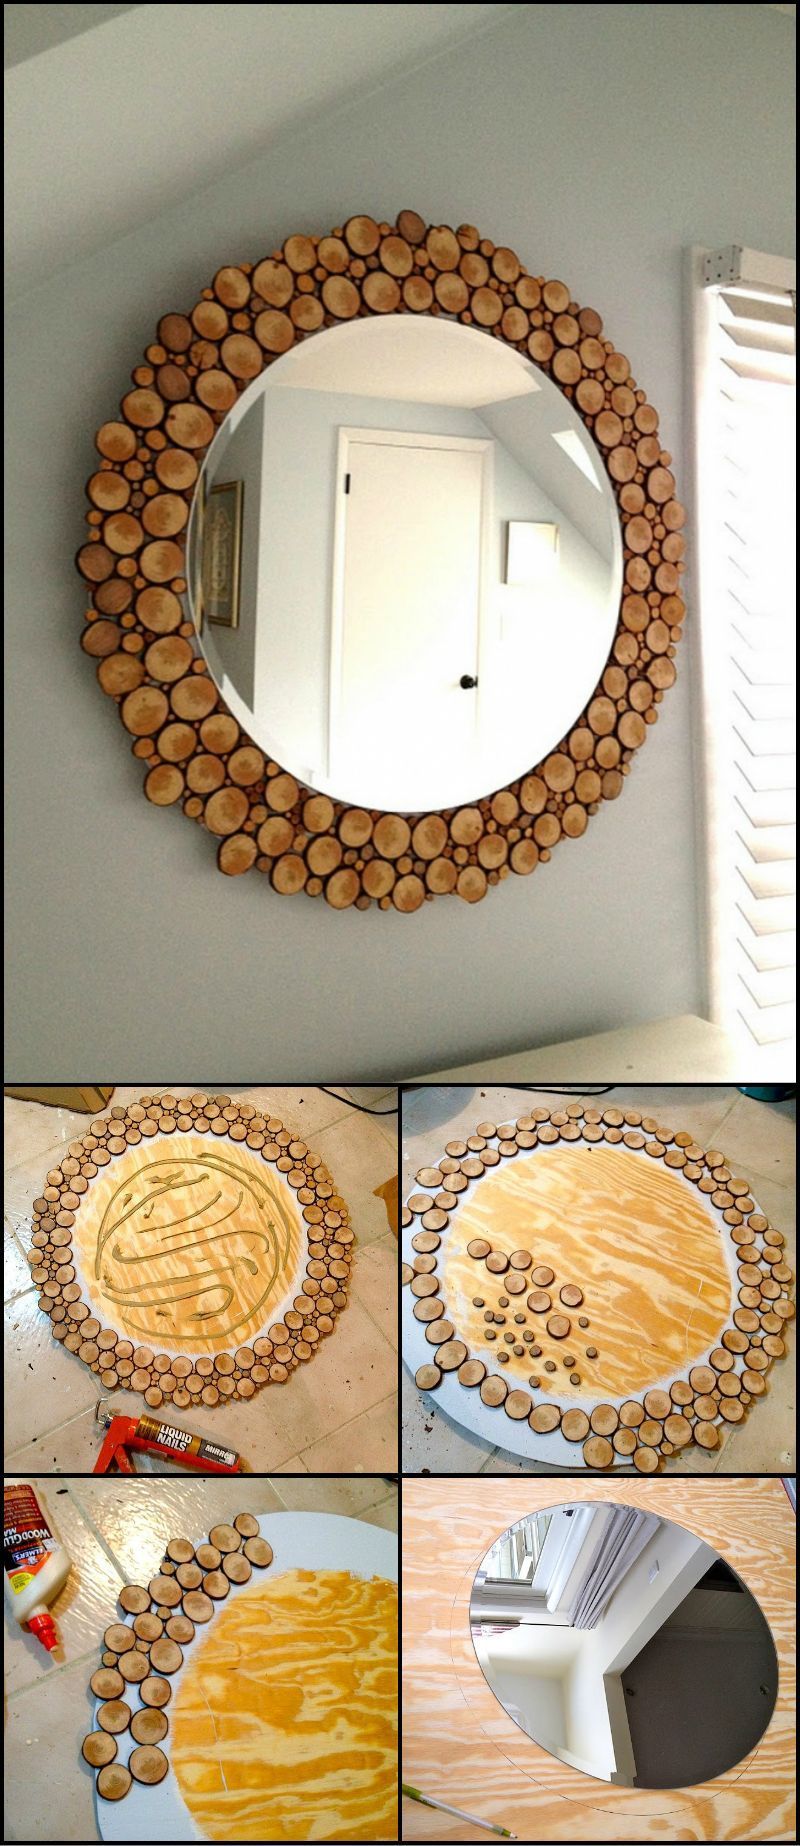 Tutorial: How To Make A Circular Mirror With Wood Slices  theownerbuilderne…  Mirror, mirror on the wall… looking for a